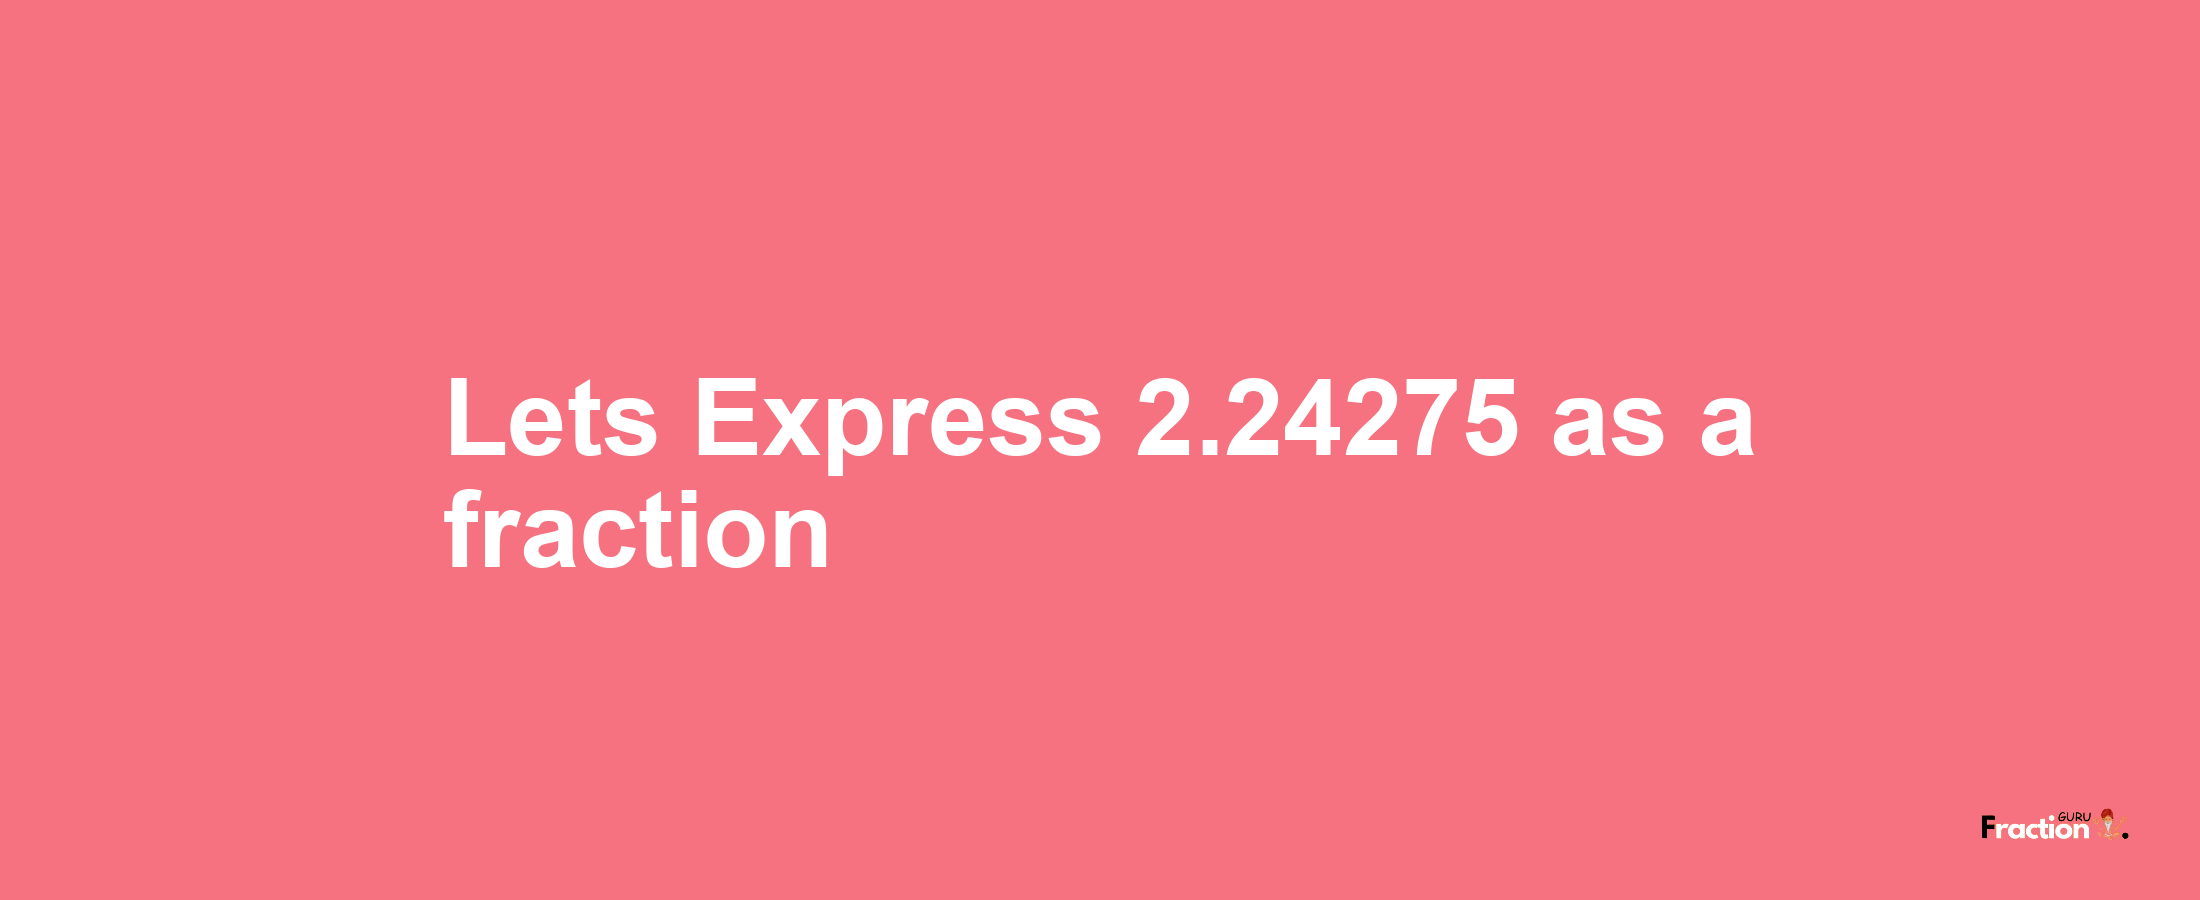 Lets Express 2.24275 as afraction